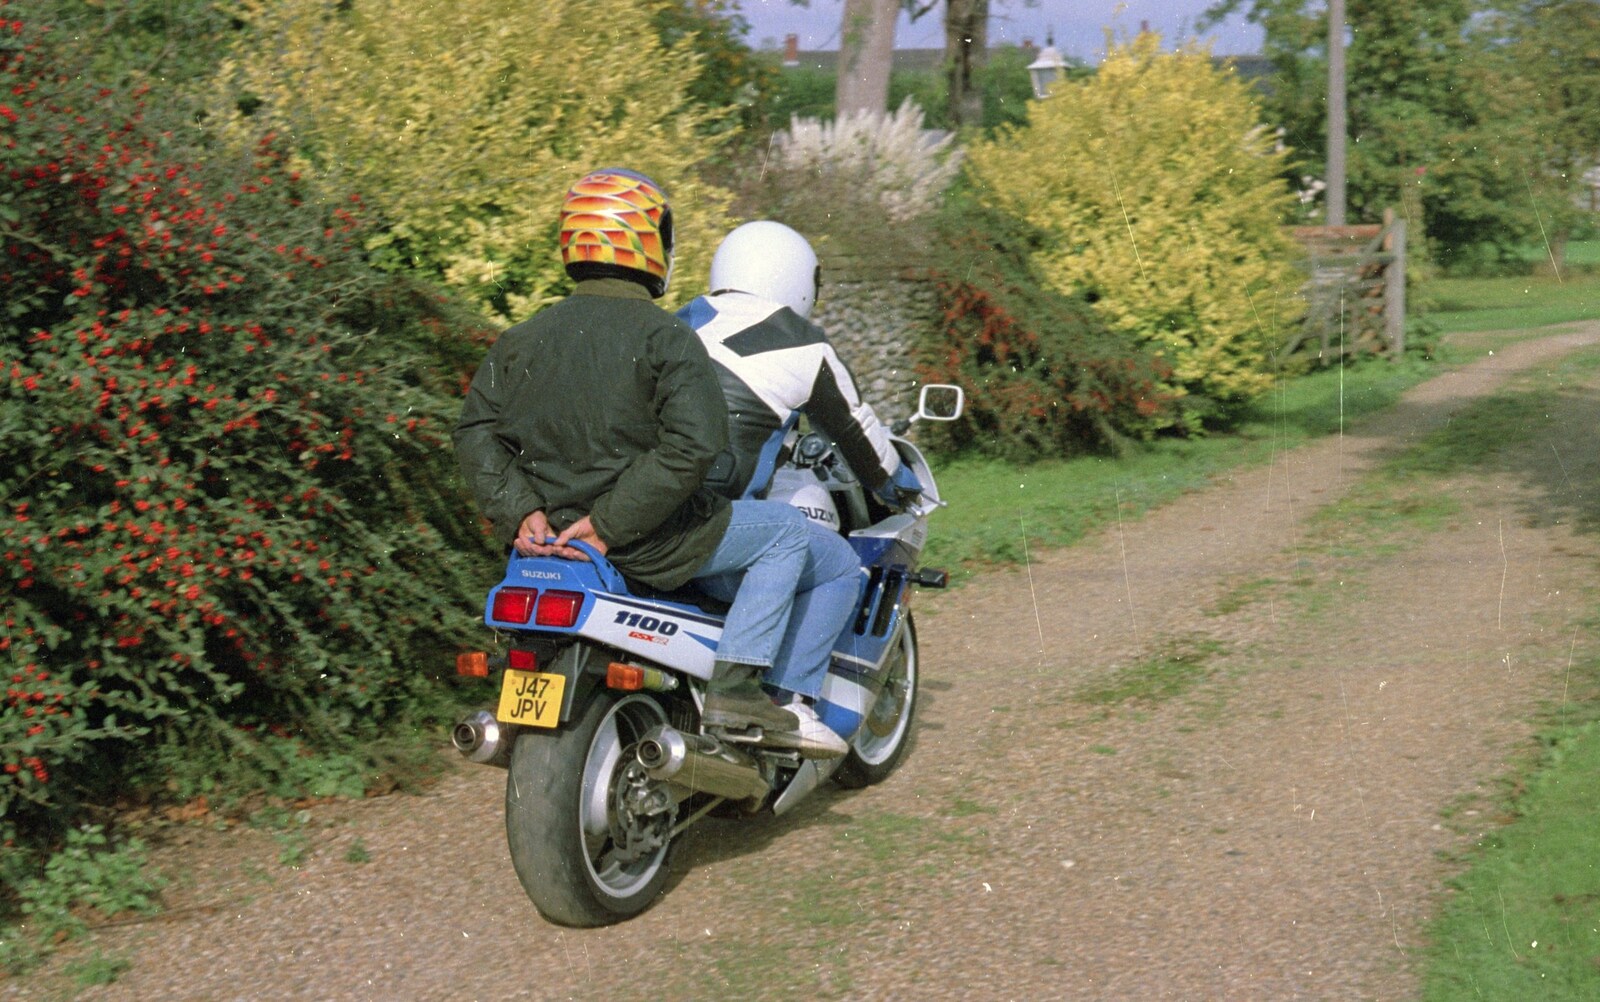 Geoff heads off on the bike from Cider Making With Geoff and Brenda, Stuston, Suffolk - 10th September 1998